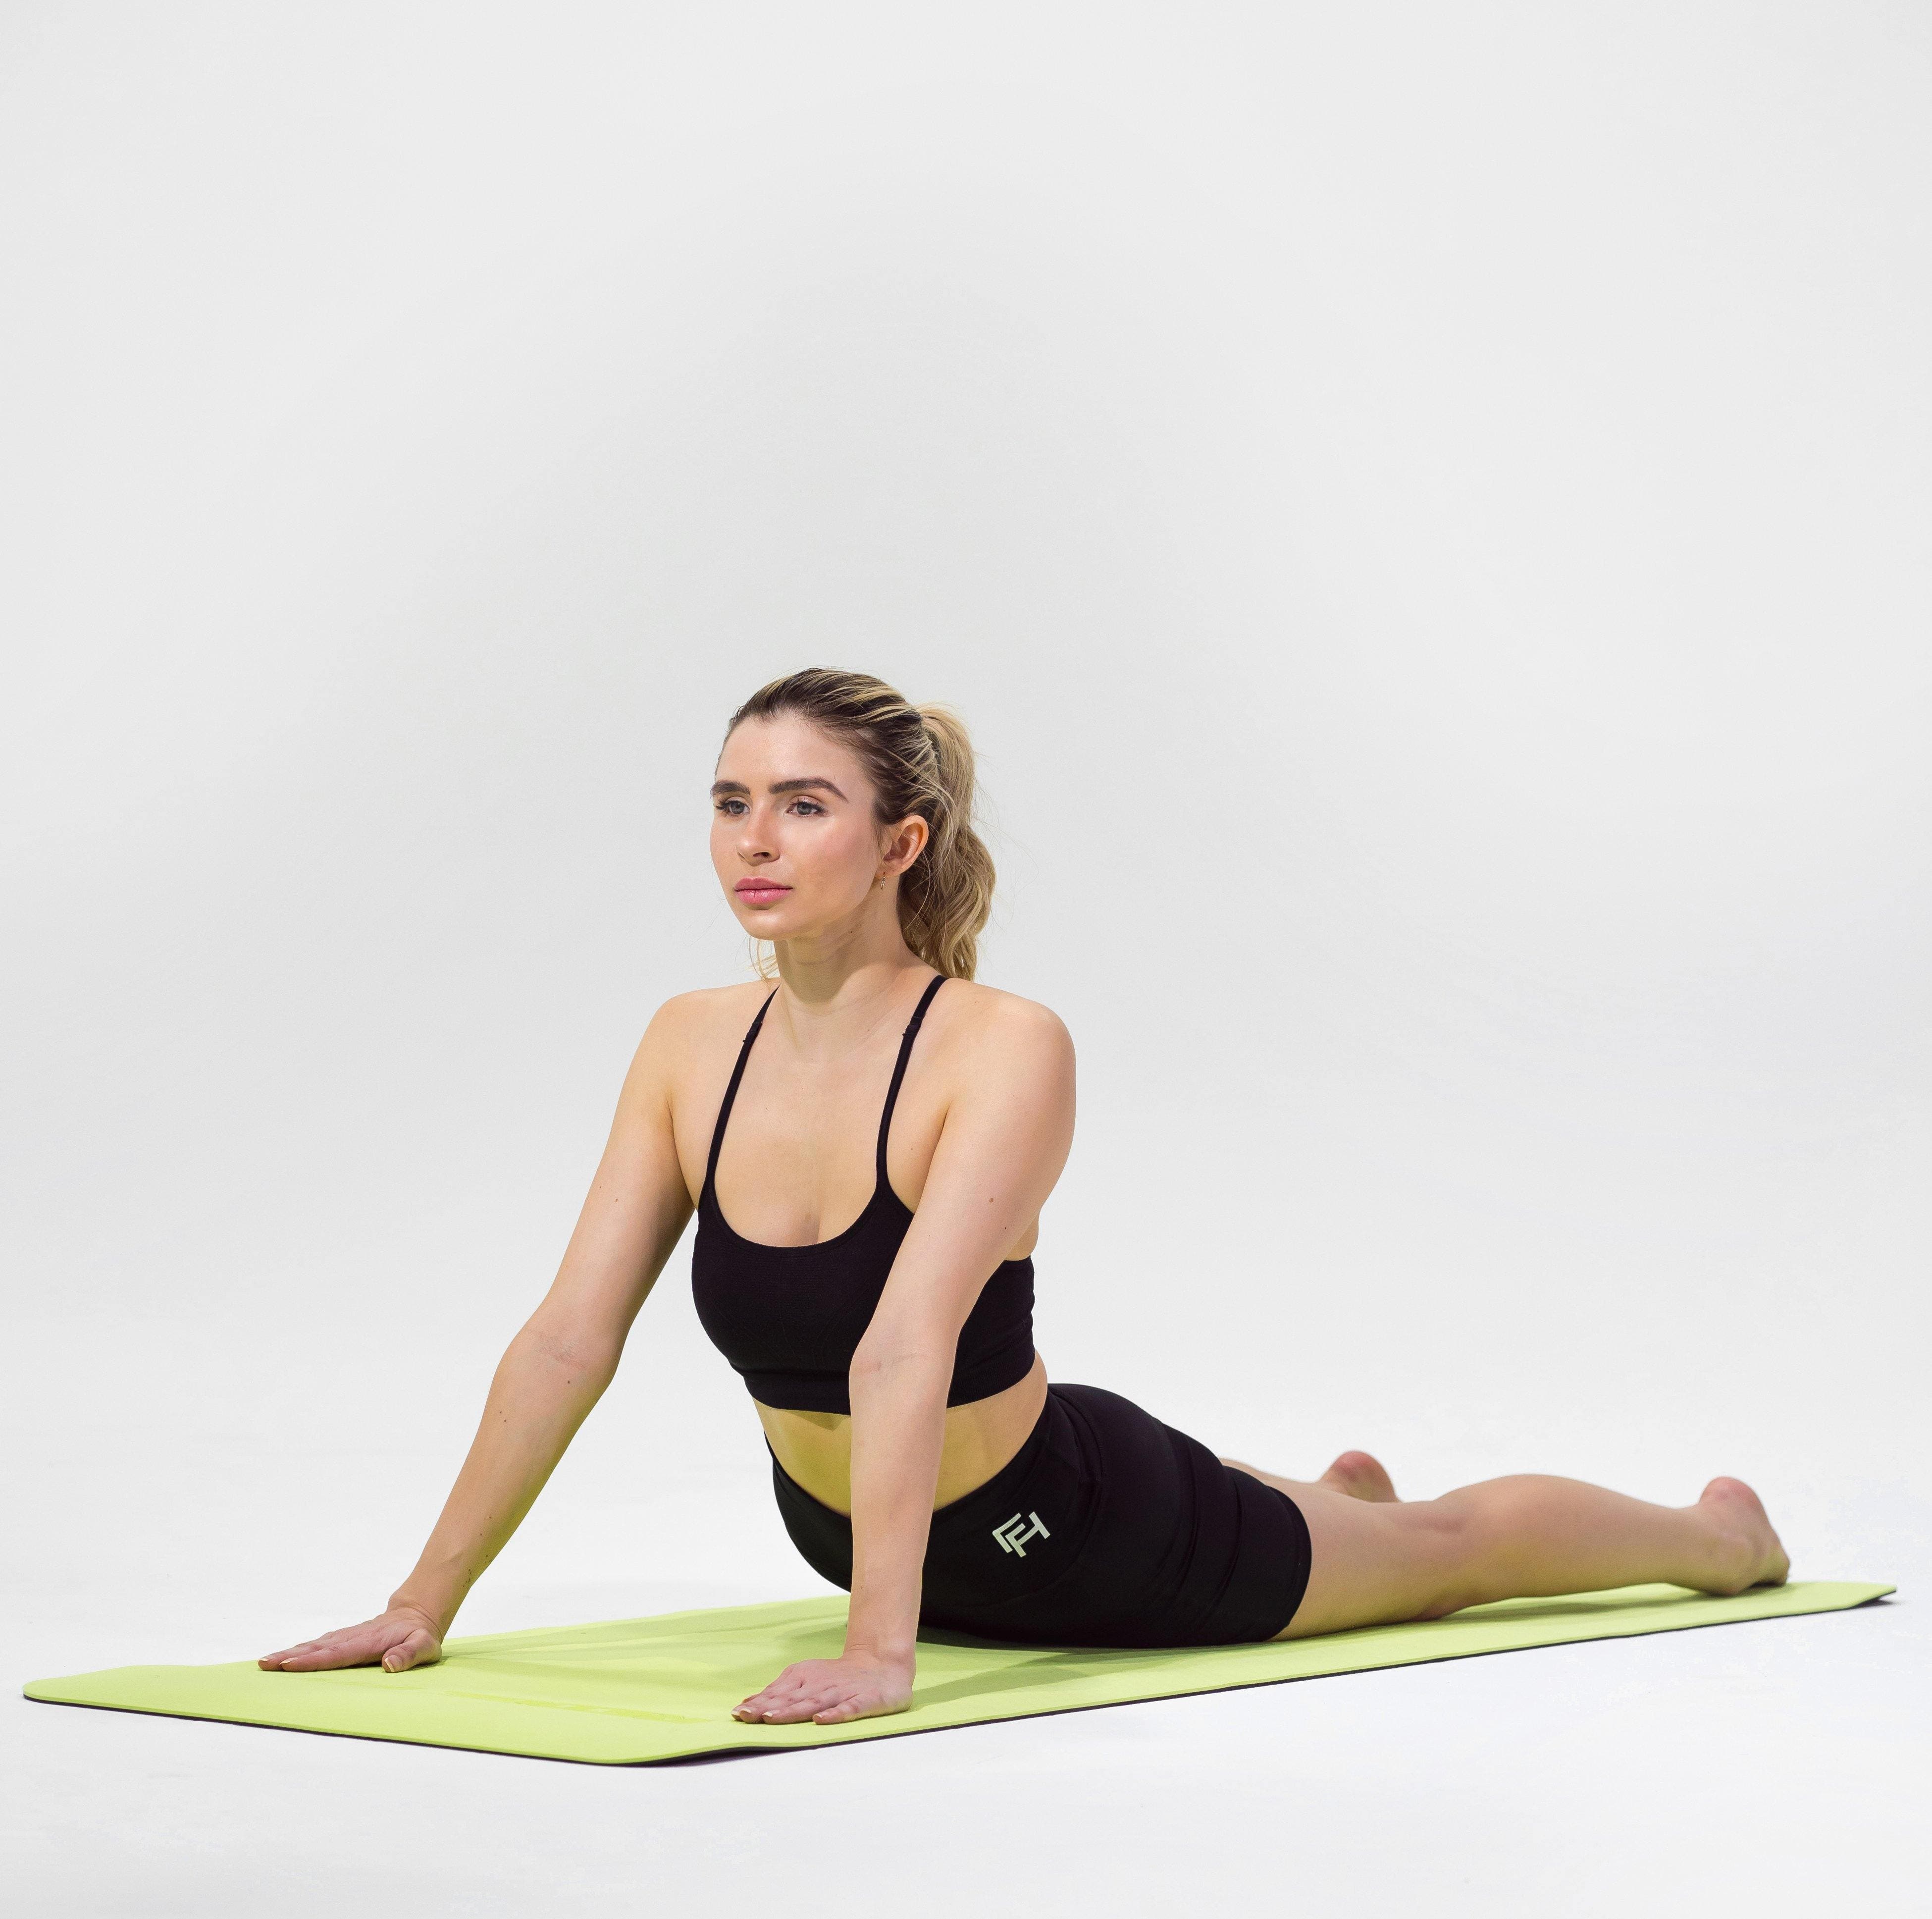 Woman modeling the Redge Fit Double Sided Workout Mat Available at https://www.getredge.com/products/redge-double-sided-workout-mat